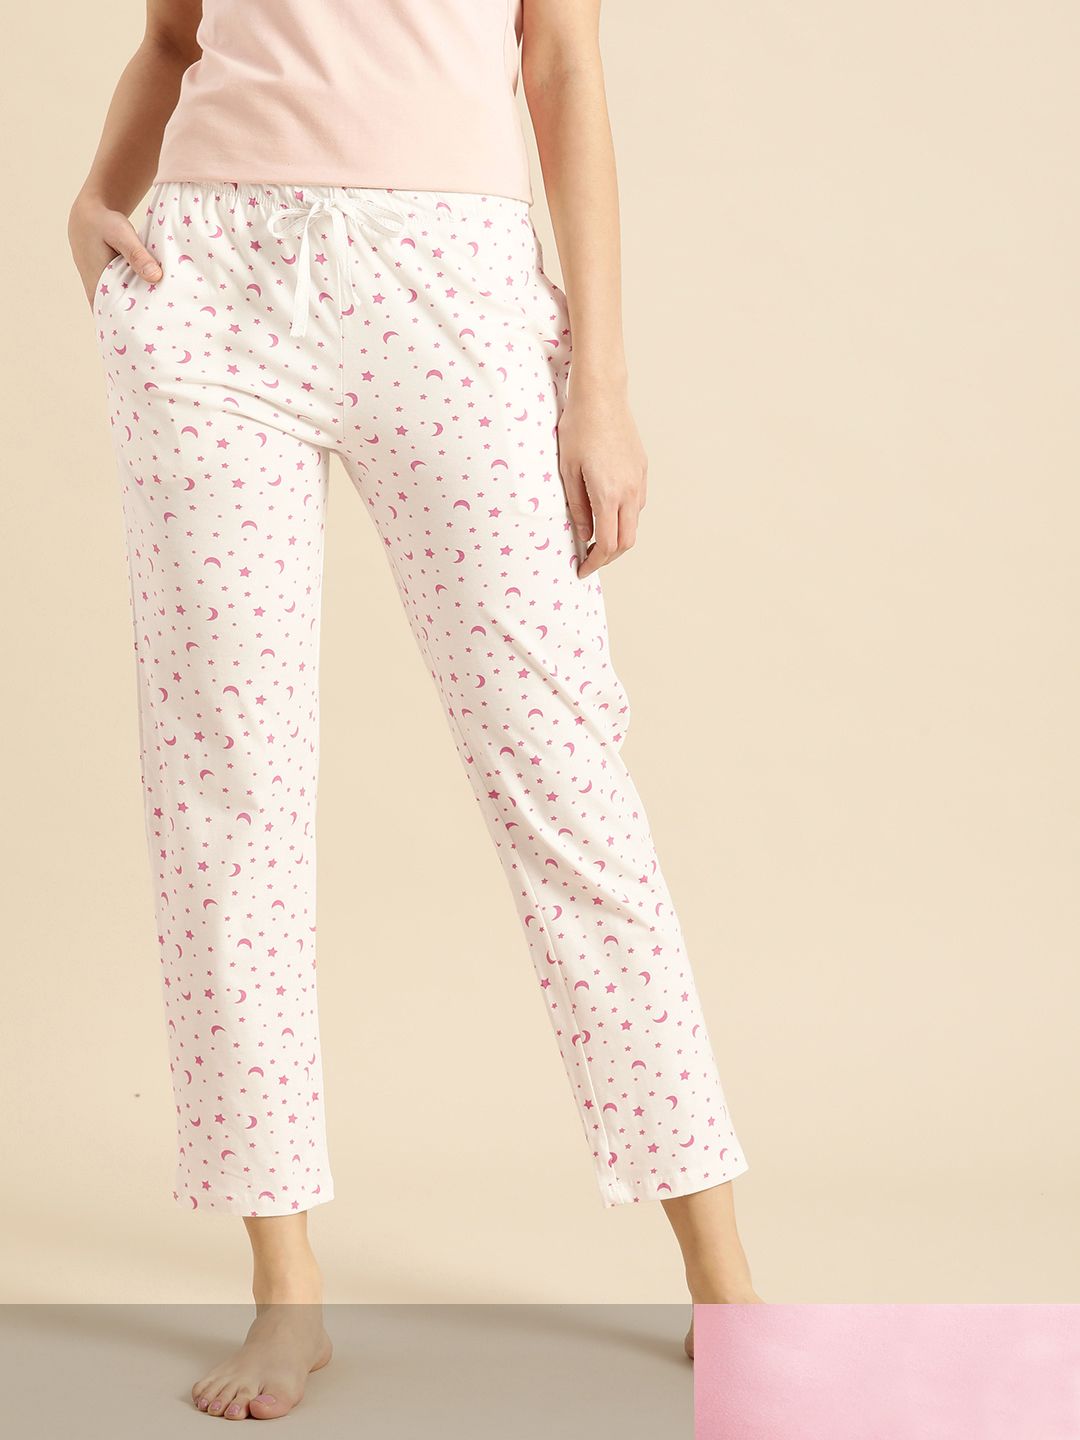 Dreamz by Pantaloons Women Pack Of 2 White & Pink Lounge Pants Price in India